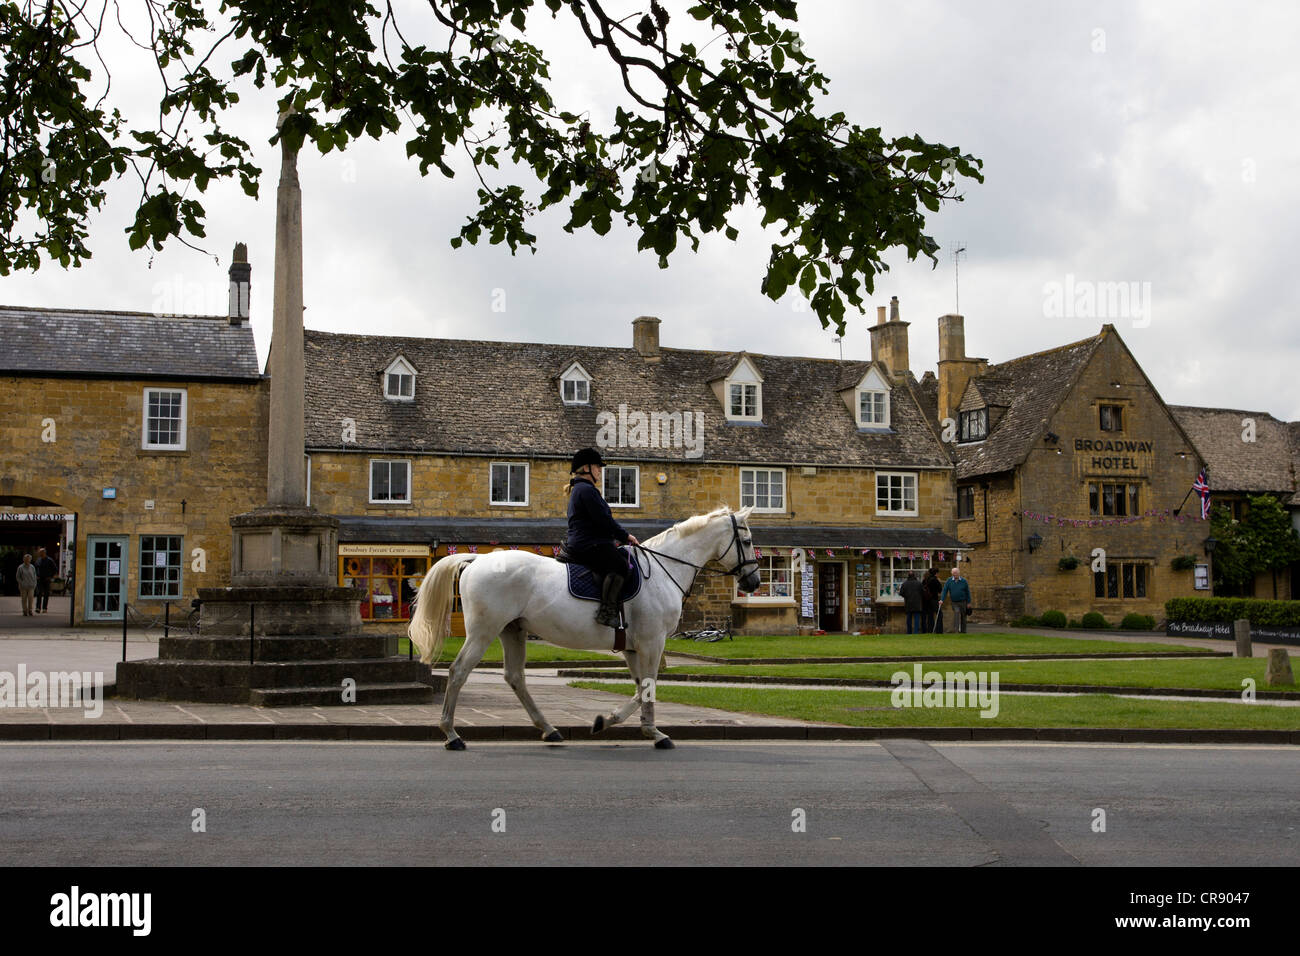 A horse and rider on their way down the High Street, Broadway , near the village centre, Cotswolds, UK. Stock Photo